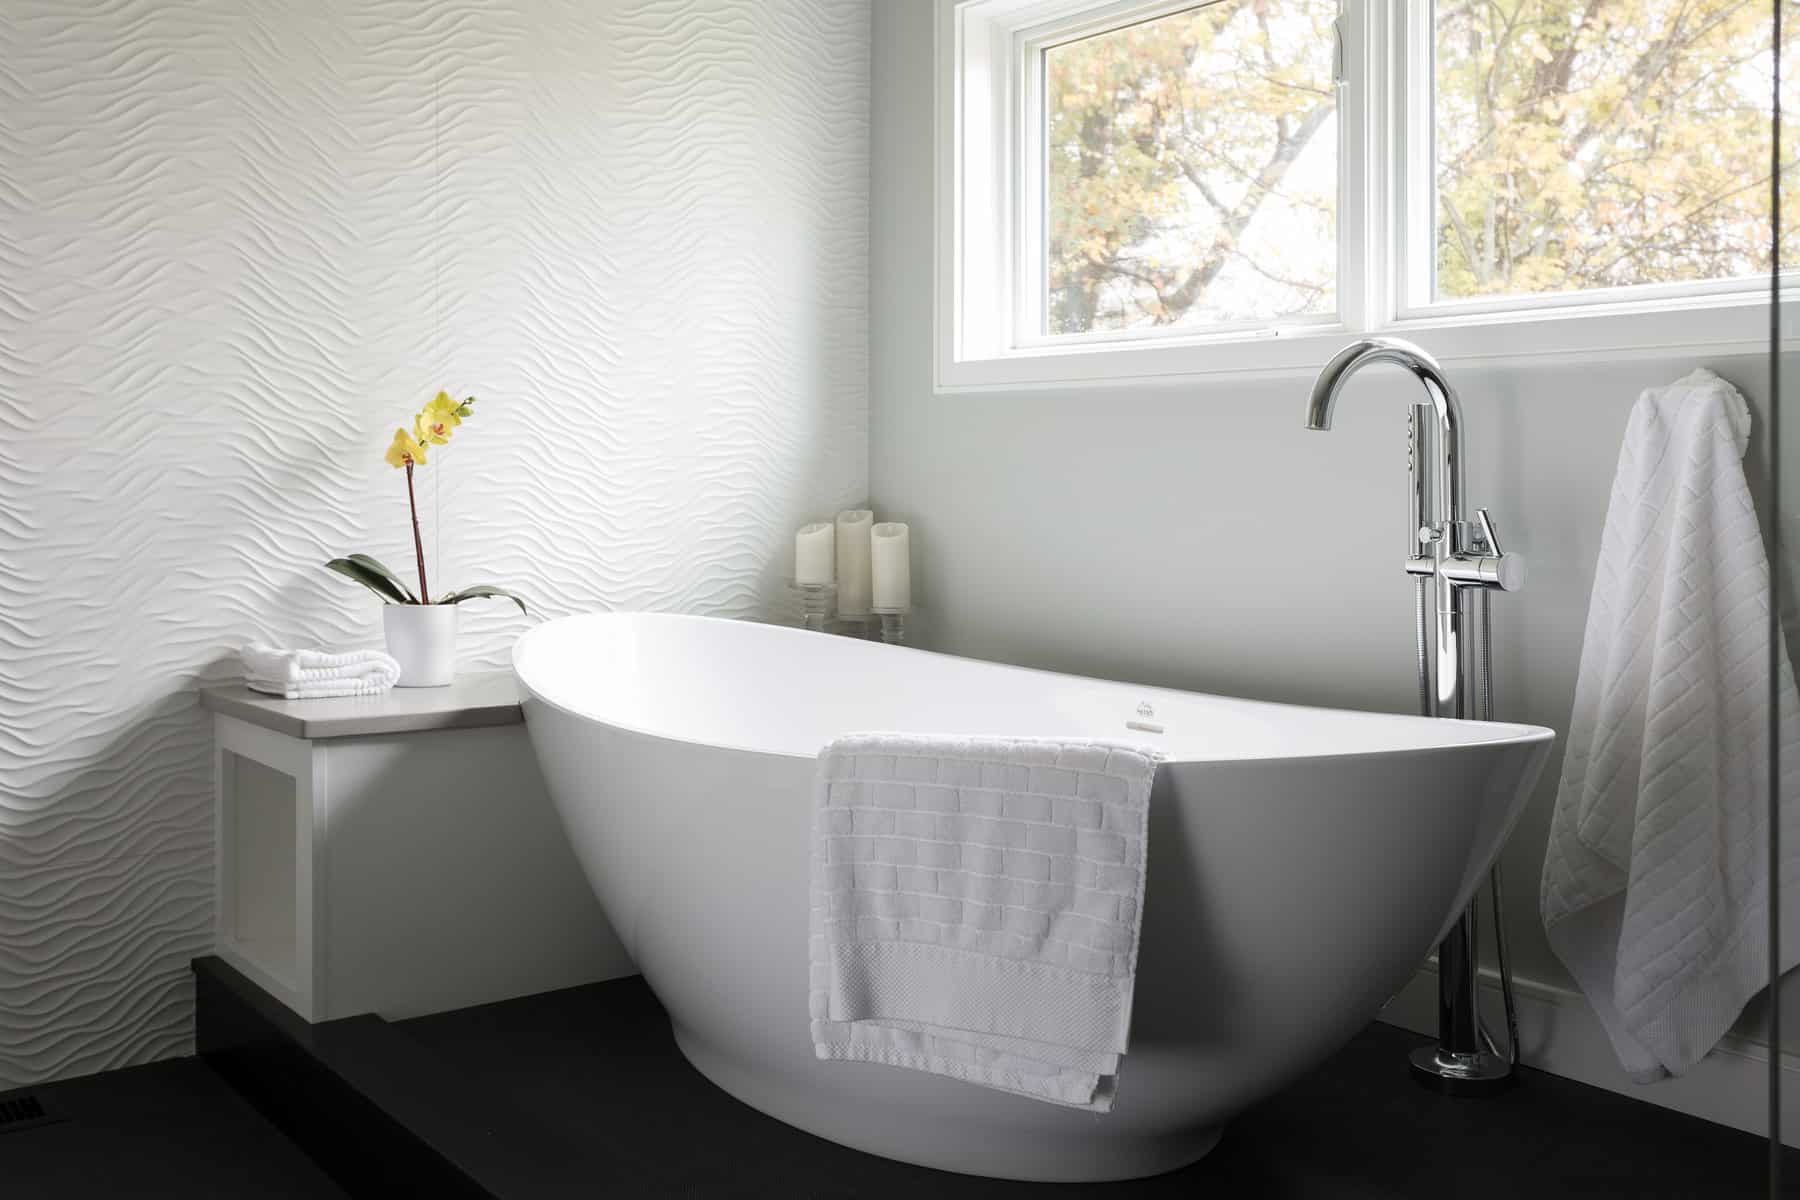 ANDOVER TOWNHOUSE BATH-The wave theme is repeated with the wave white porcelanosa tile wall alongside the tub. An elevated tub deck doubles as a drying platform outside of shower. The innovative Link floor tile features a vinyl top above a pvc base which prevents water absorption. 2017 Designer Bath Shine award for best spa bath.